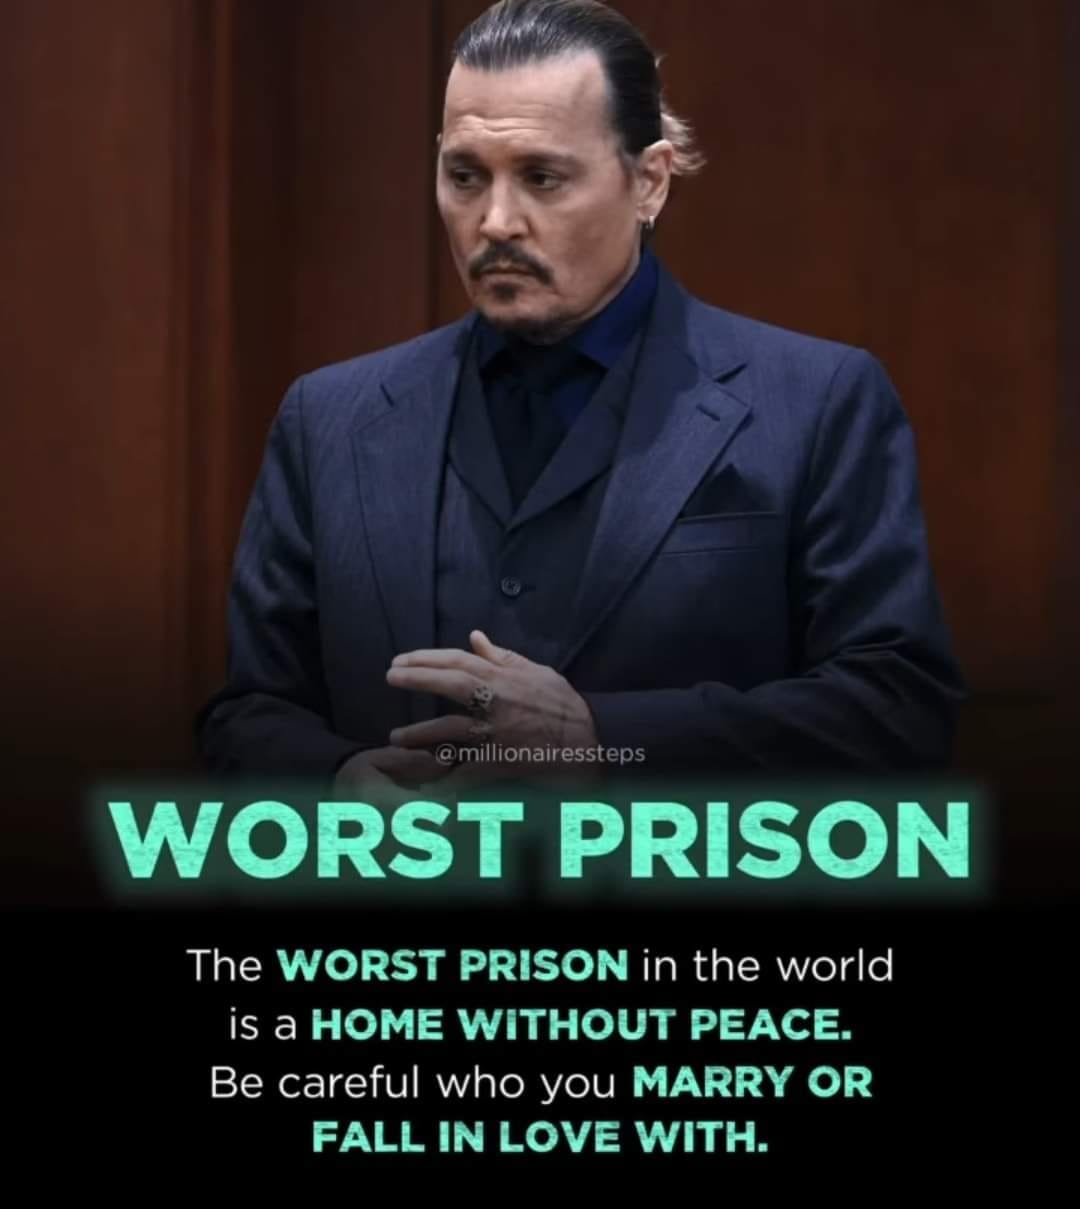 The worst prison in the world is a home without peace. Be careful who you marry or fall in love with.